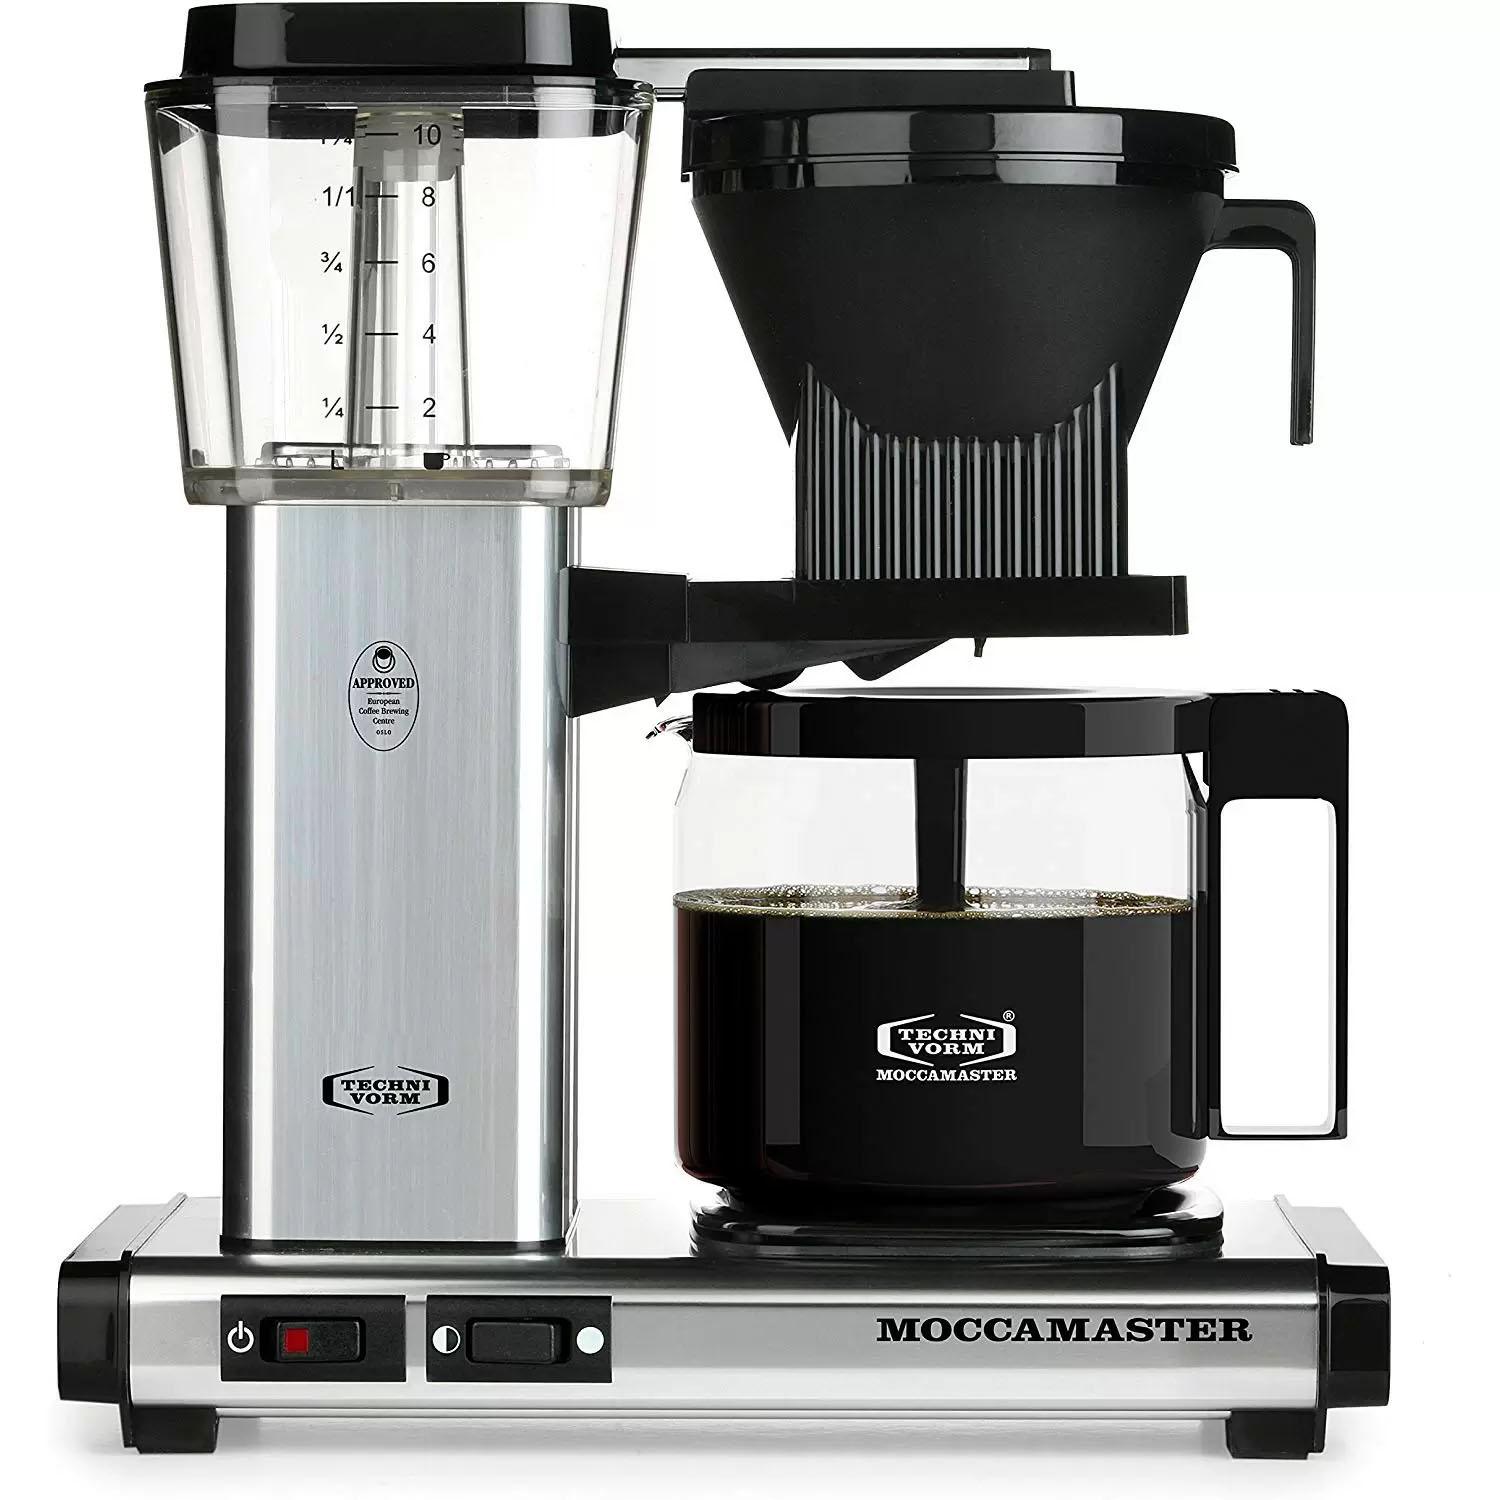 Technivorm Moccamaster 59616 KBG Coffee Brewer for $231.75 Shipped